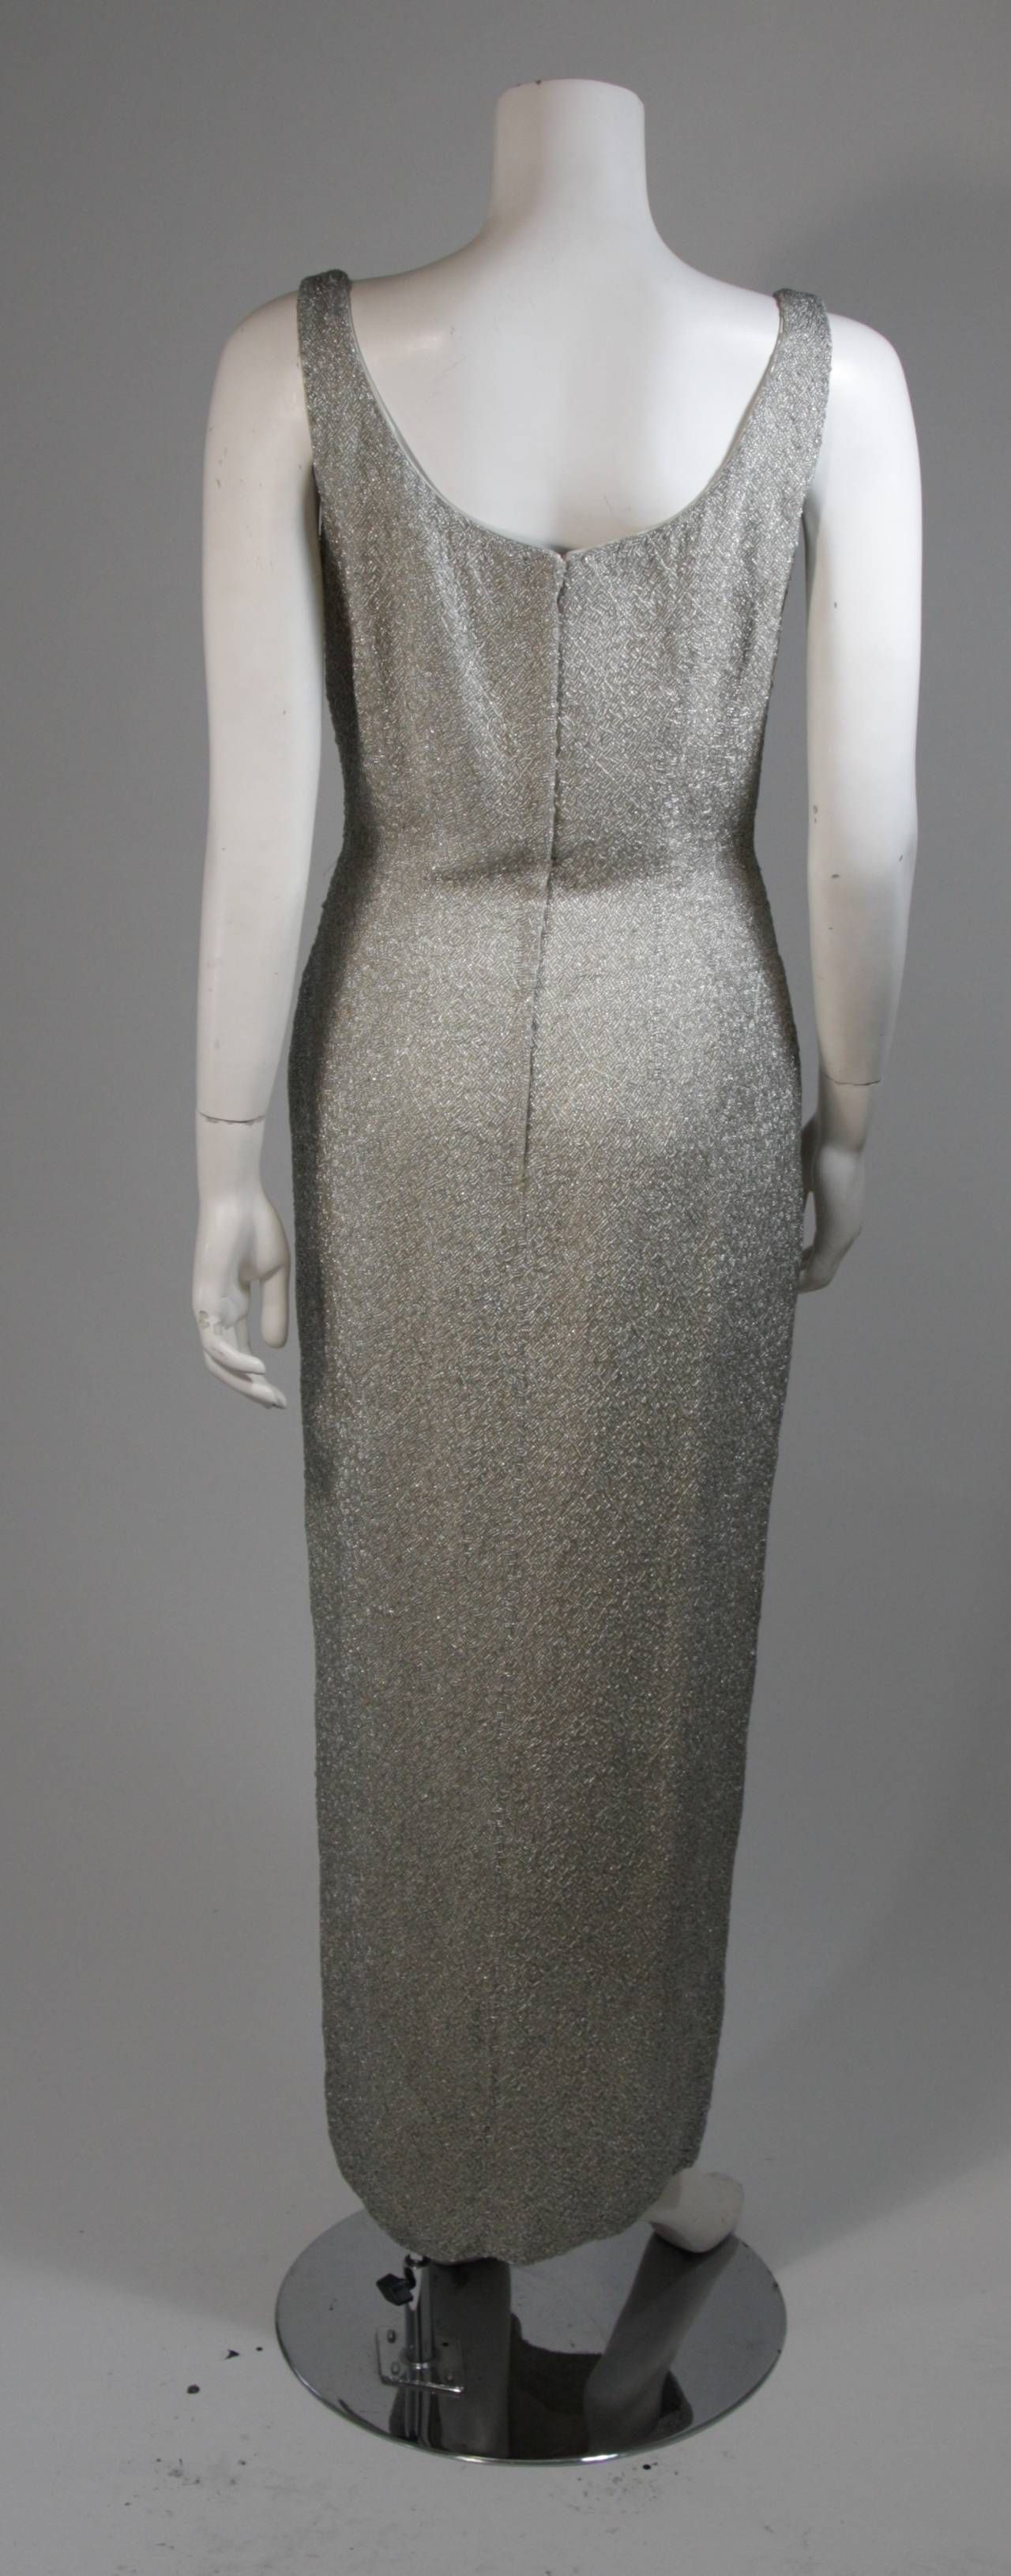 1960s Haute Couture International Heavily Beaded Gown Size Medium For Sale 4